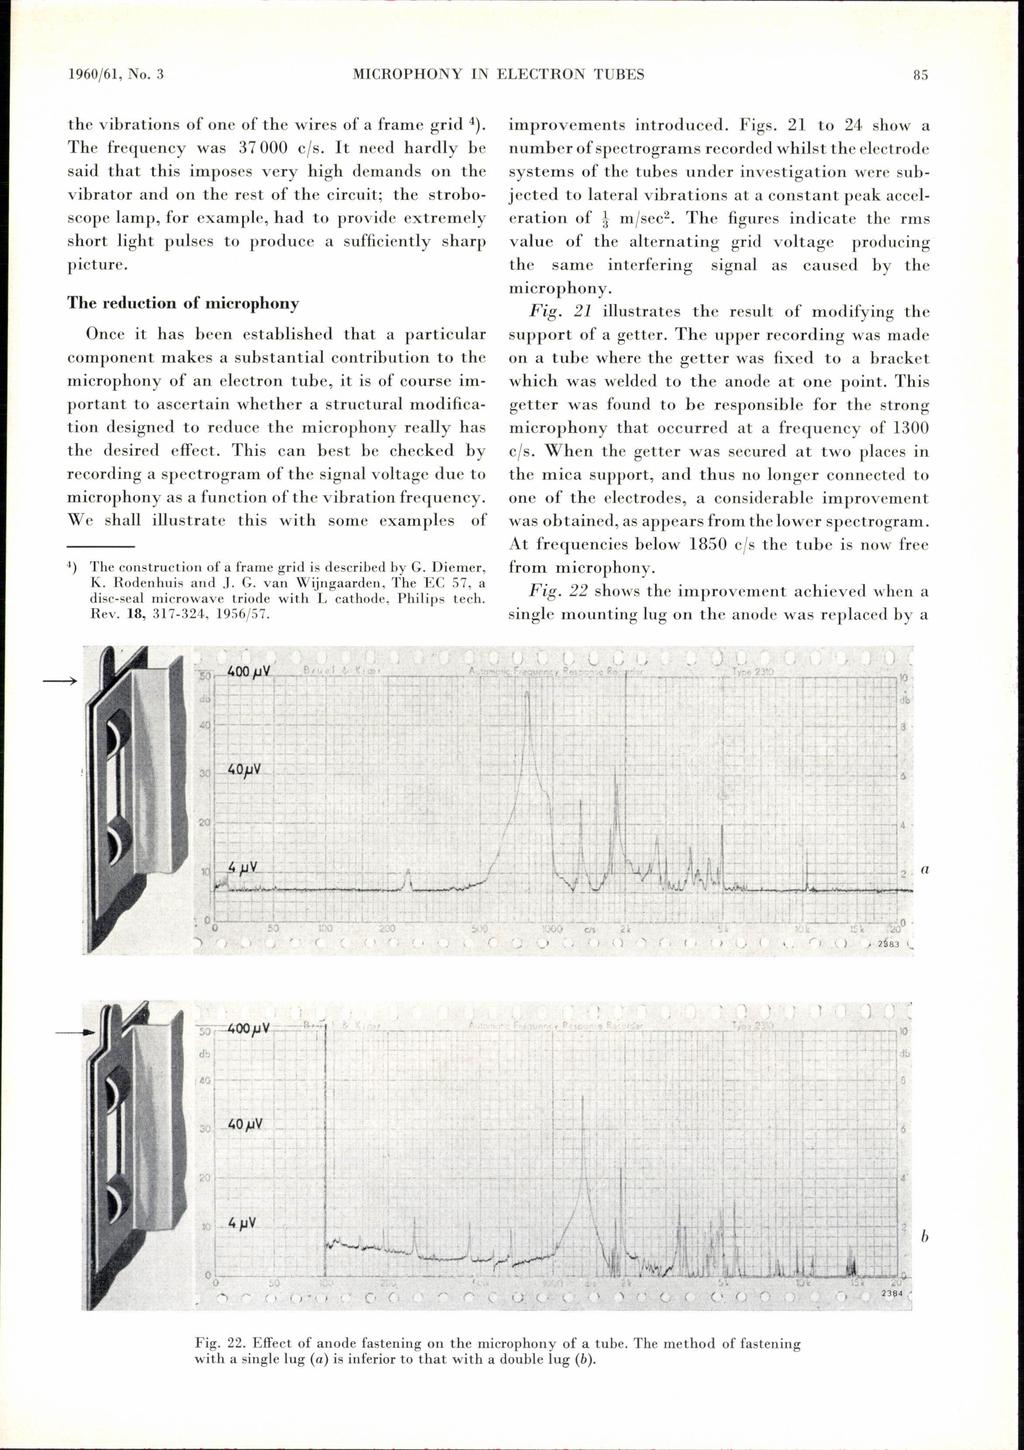 1960/61, No. 3 MICROPHONY IN ELECTRON TUBES 85 the virtions of one of the wires of frme grid 4). The frequency ws 37000 cis.